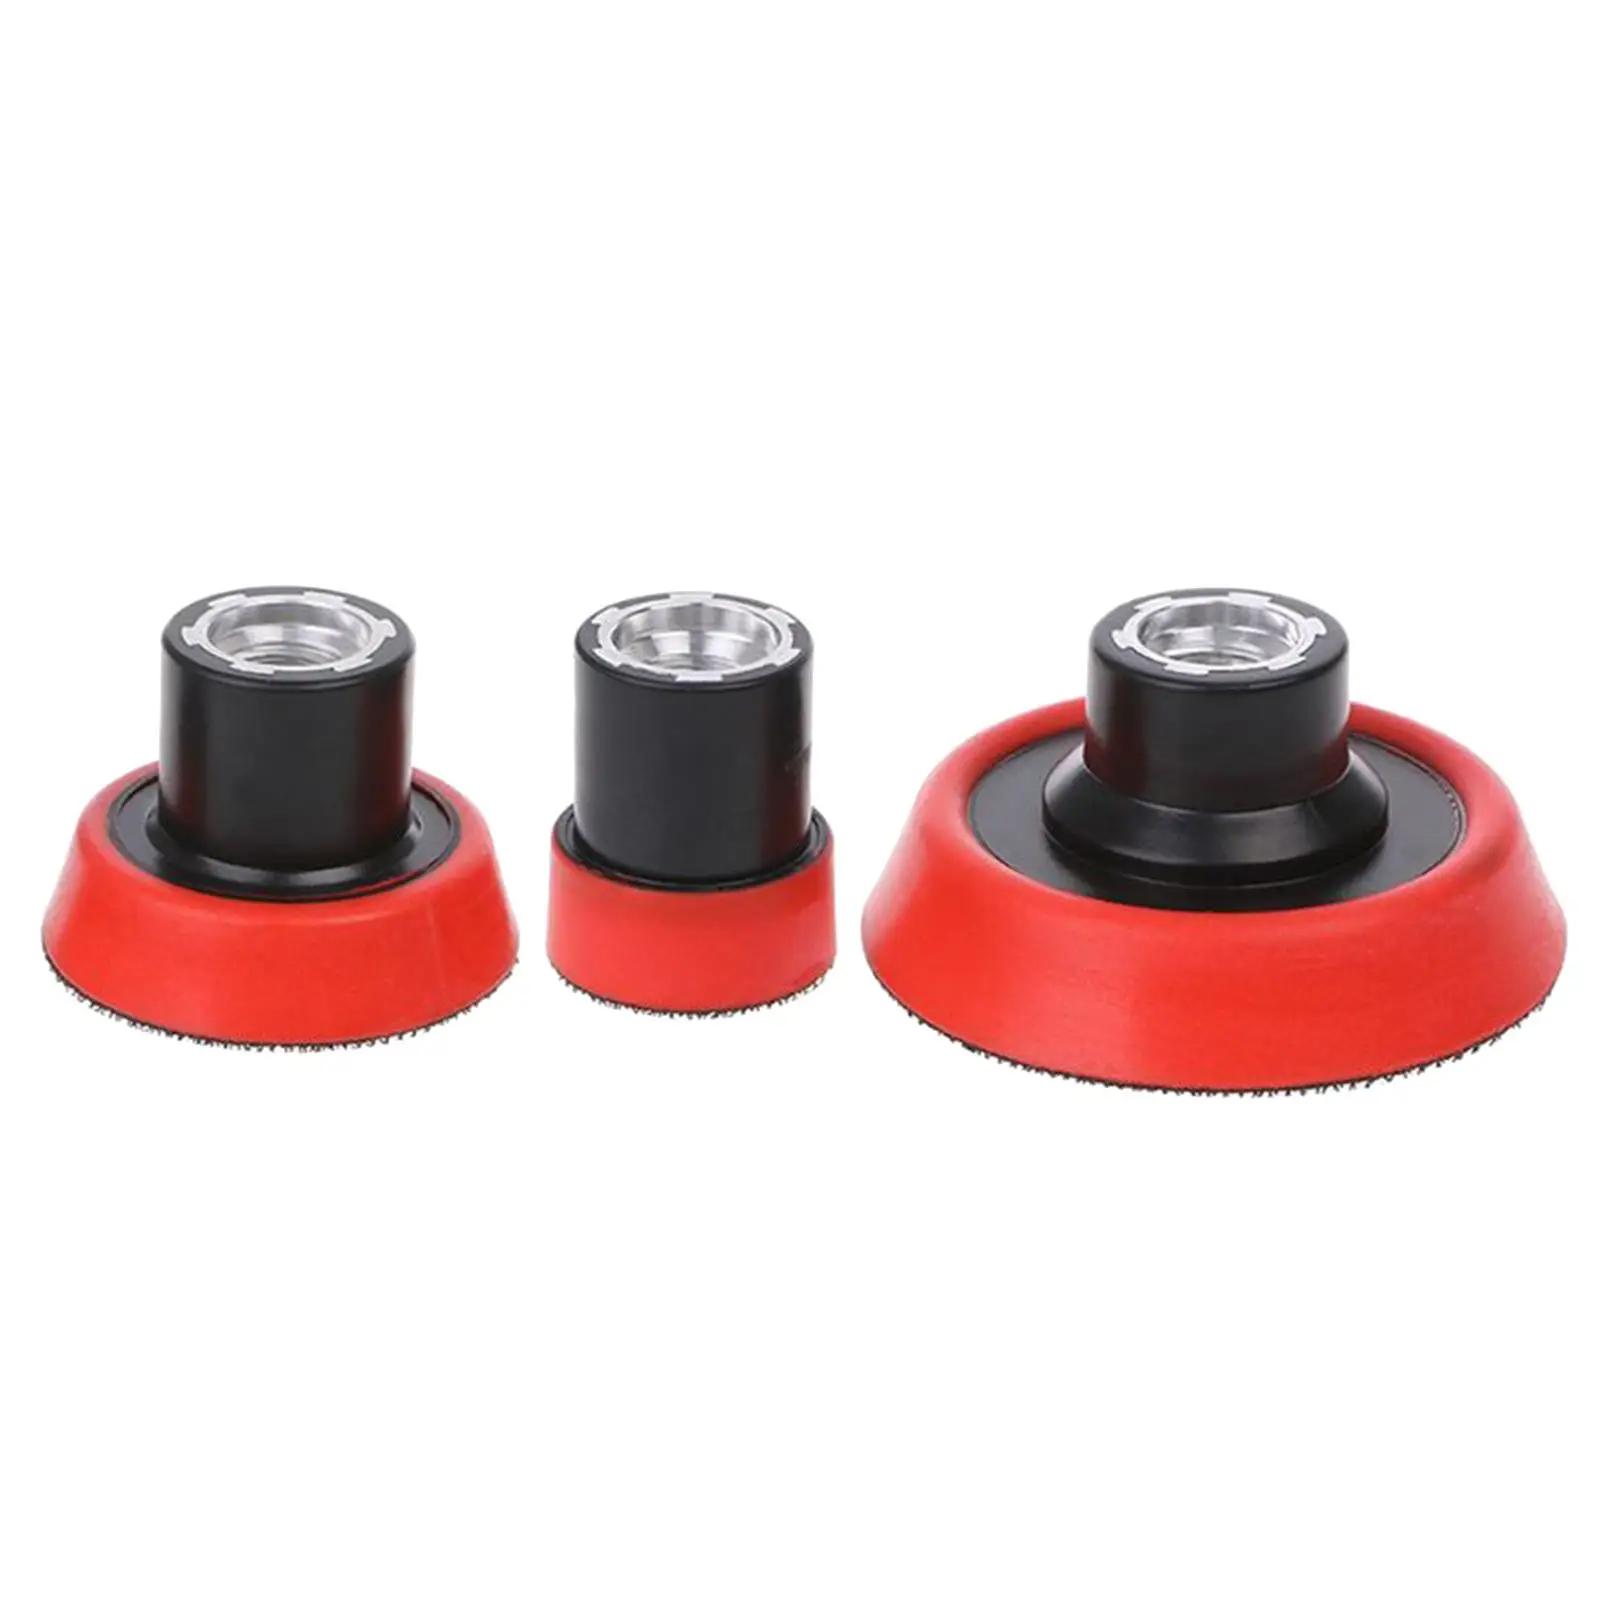 3 Pieces M14 Accessories Set Backing Plate Polisher for Car Wash Polishing